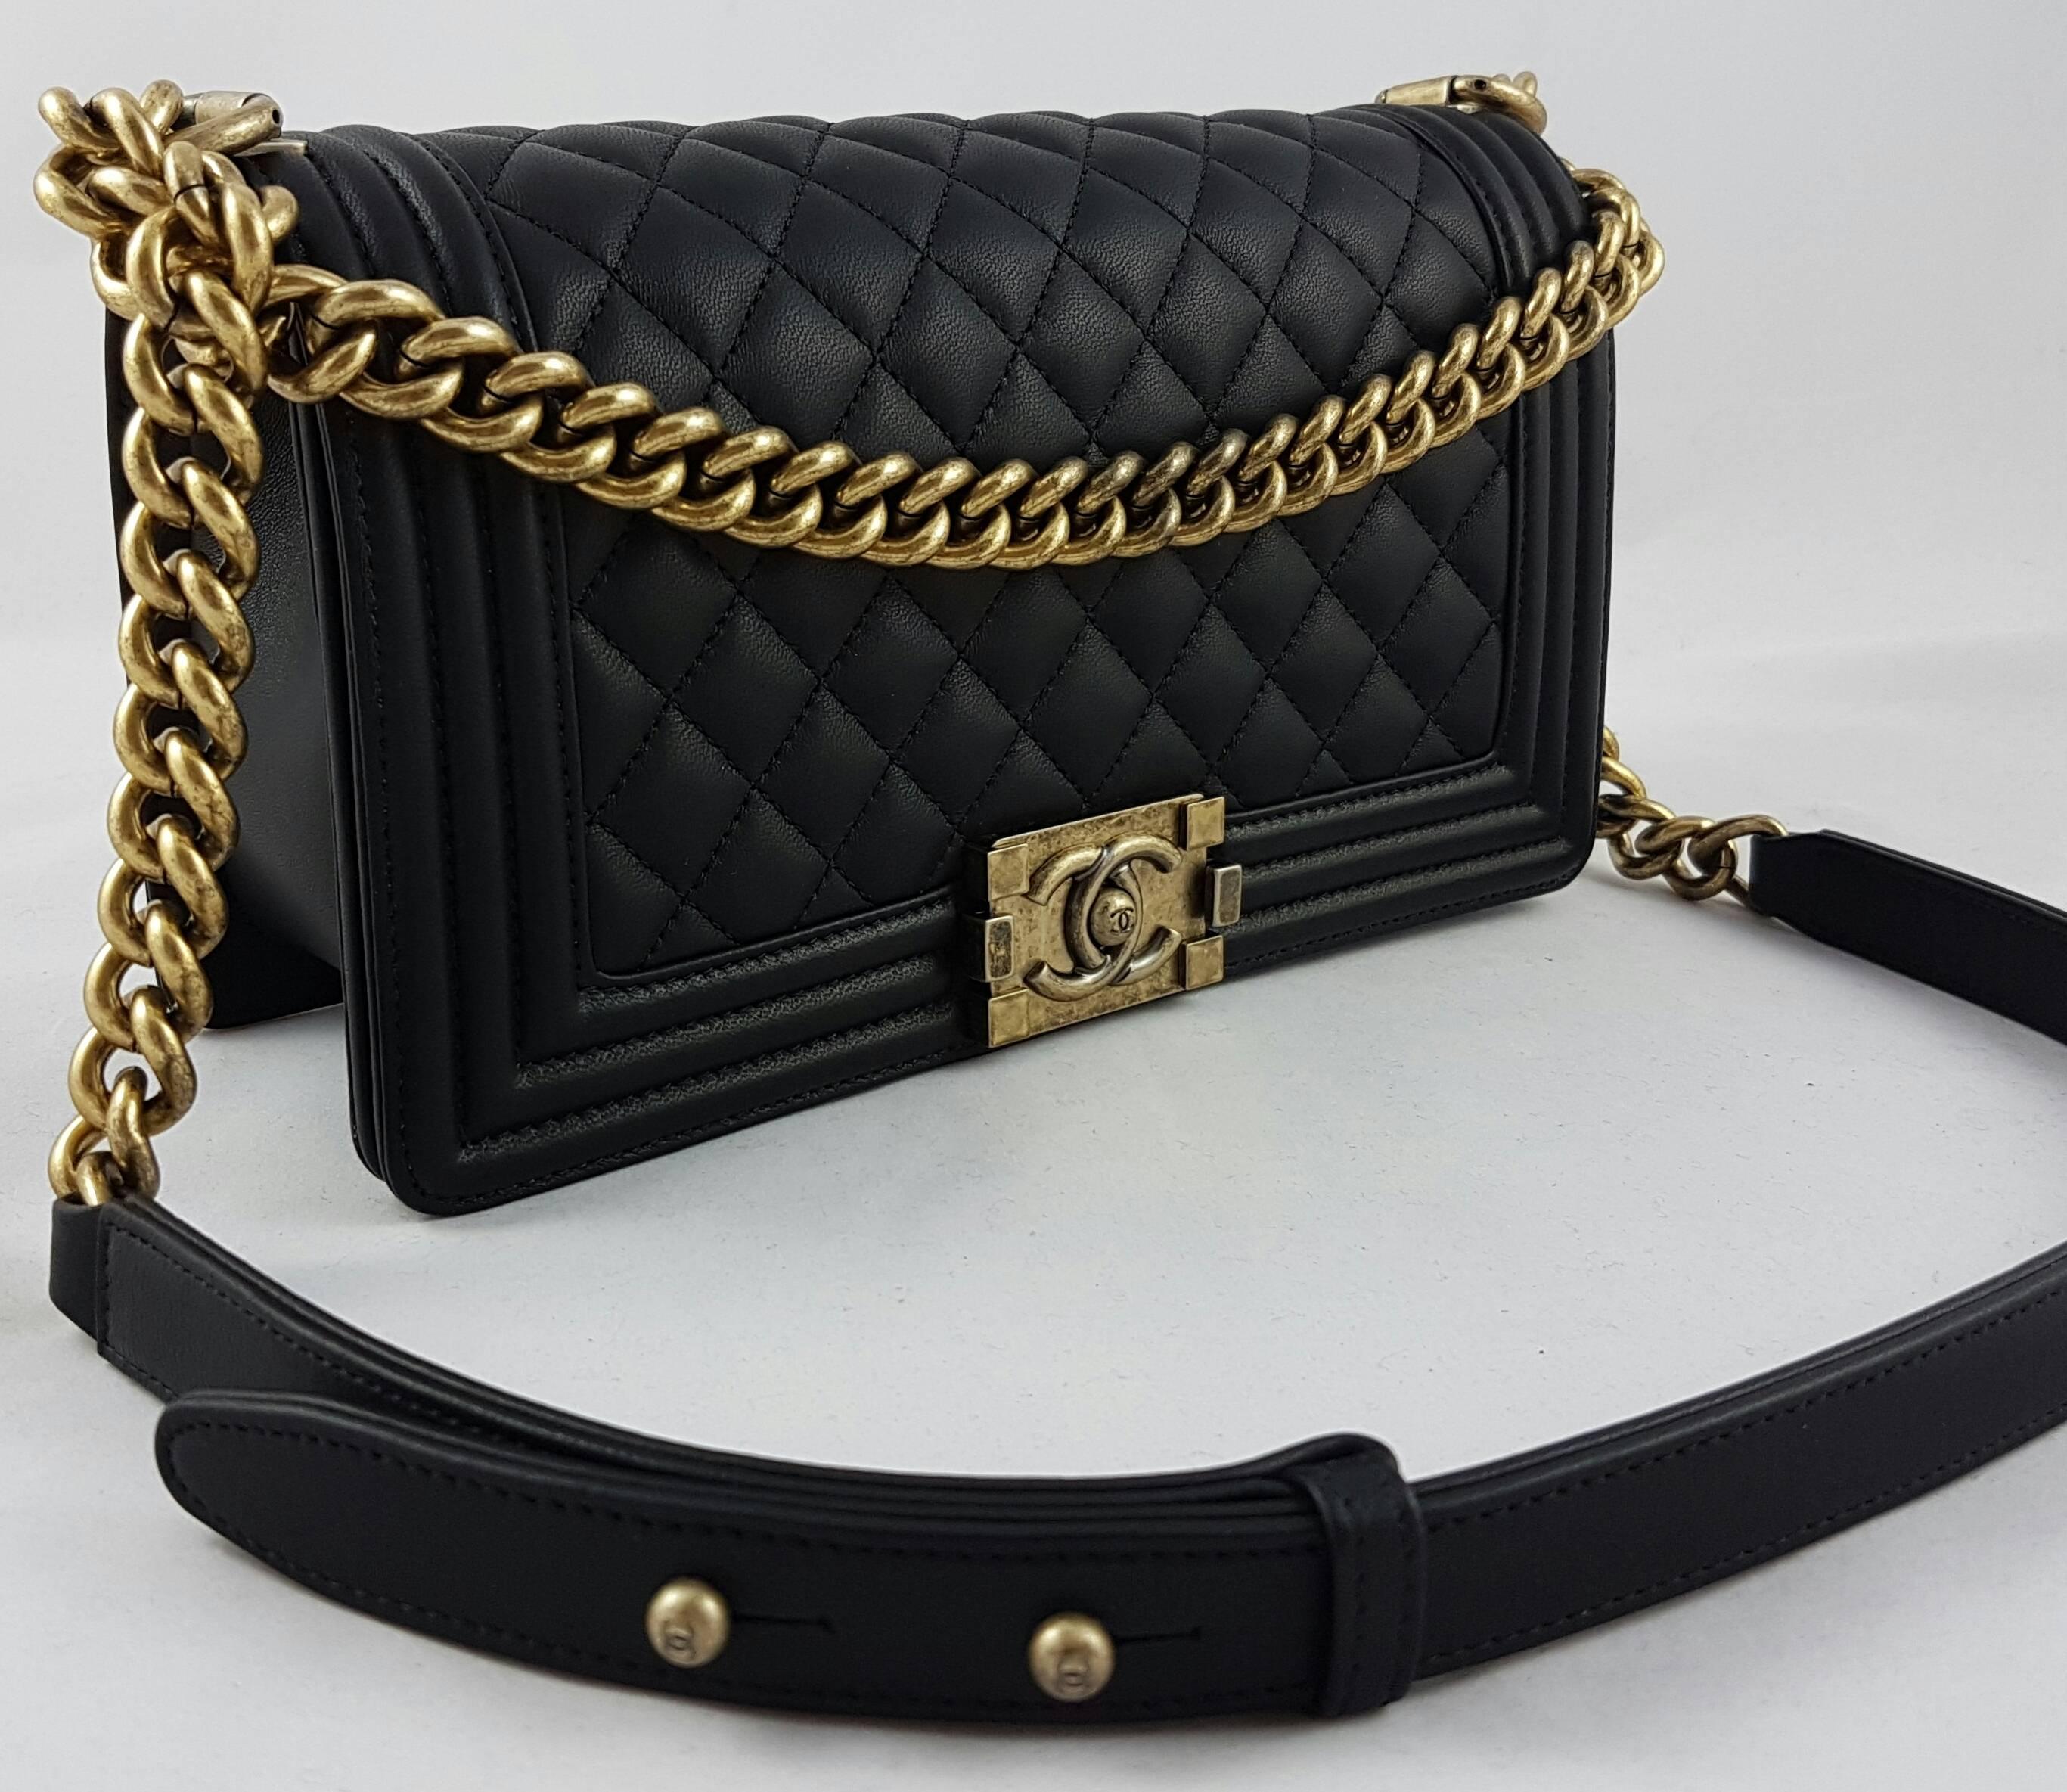 Chanel Medium Boy Bag Quilted Leather - Black with Gold Hardware 1